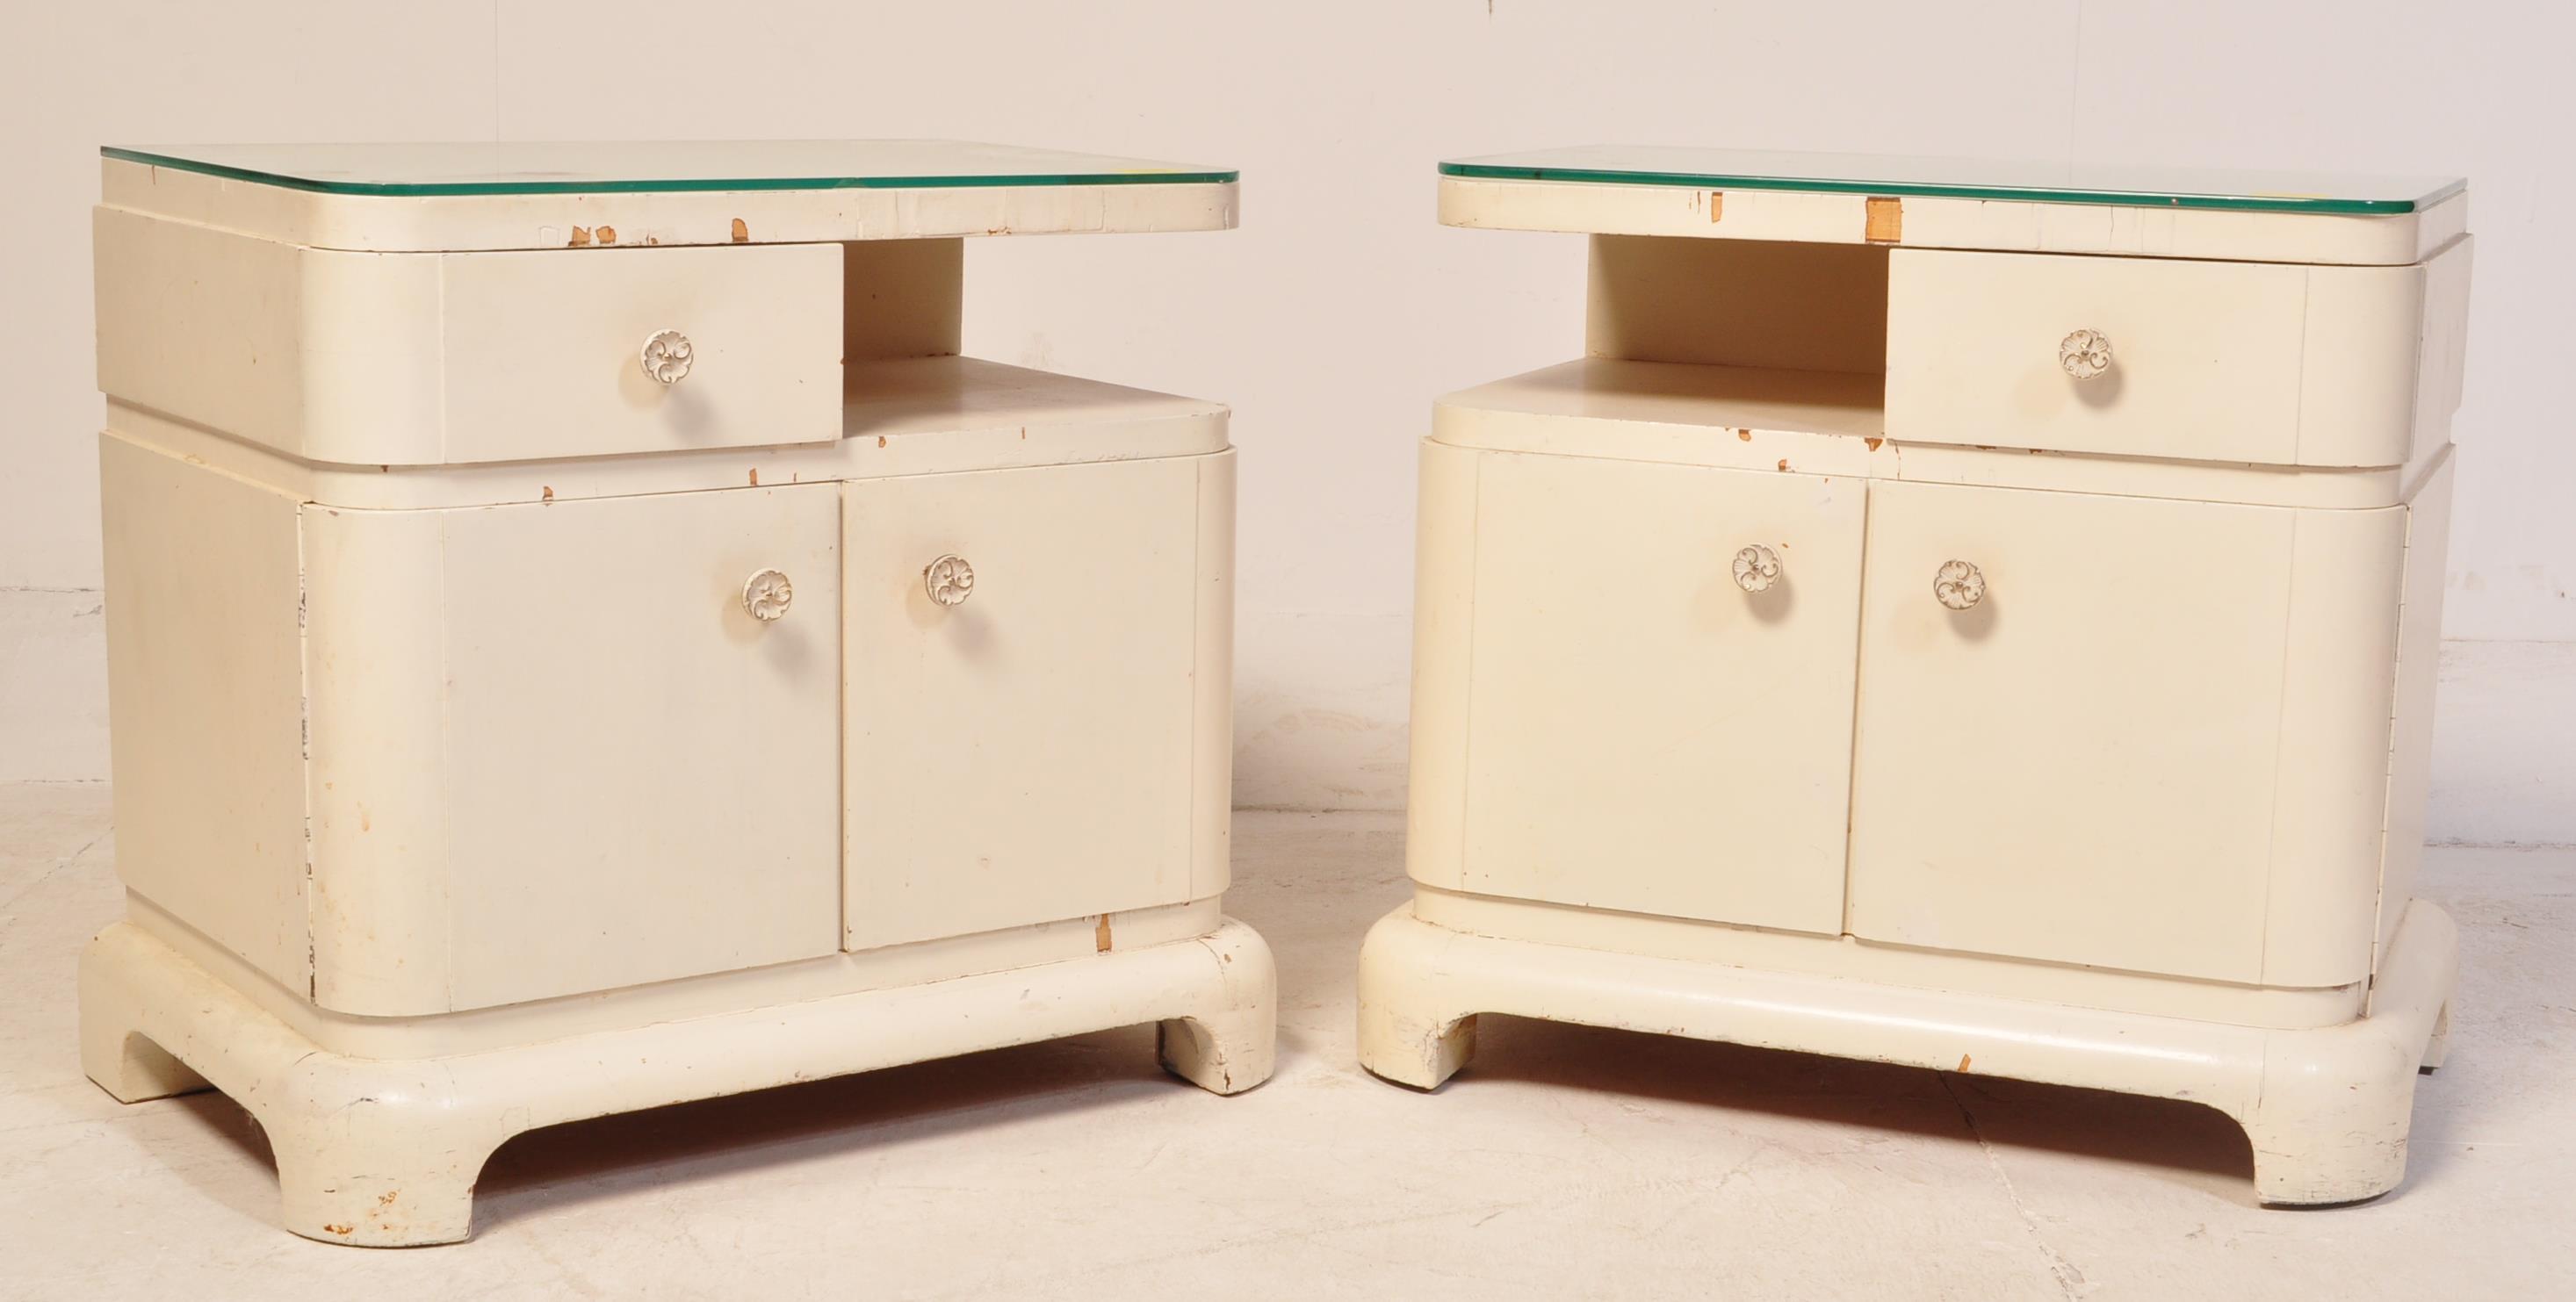 PAIR OF ART DECO 1930S COMPACTOM BEDSIDE CABINETS